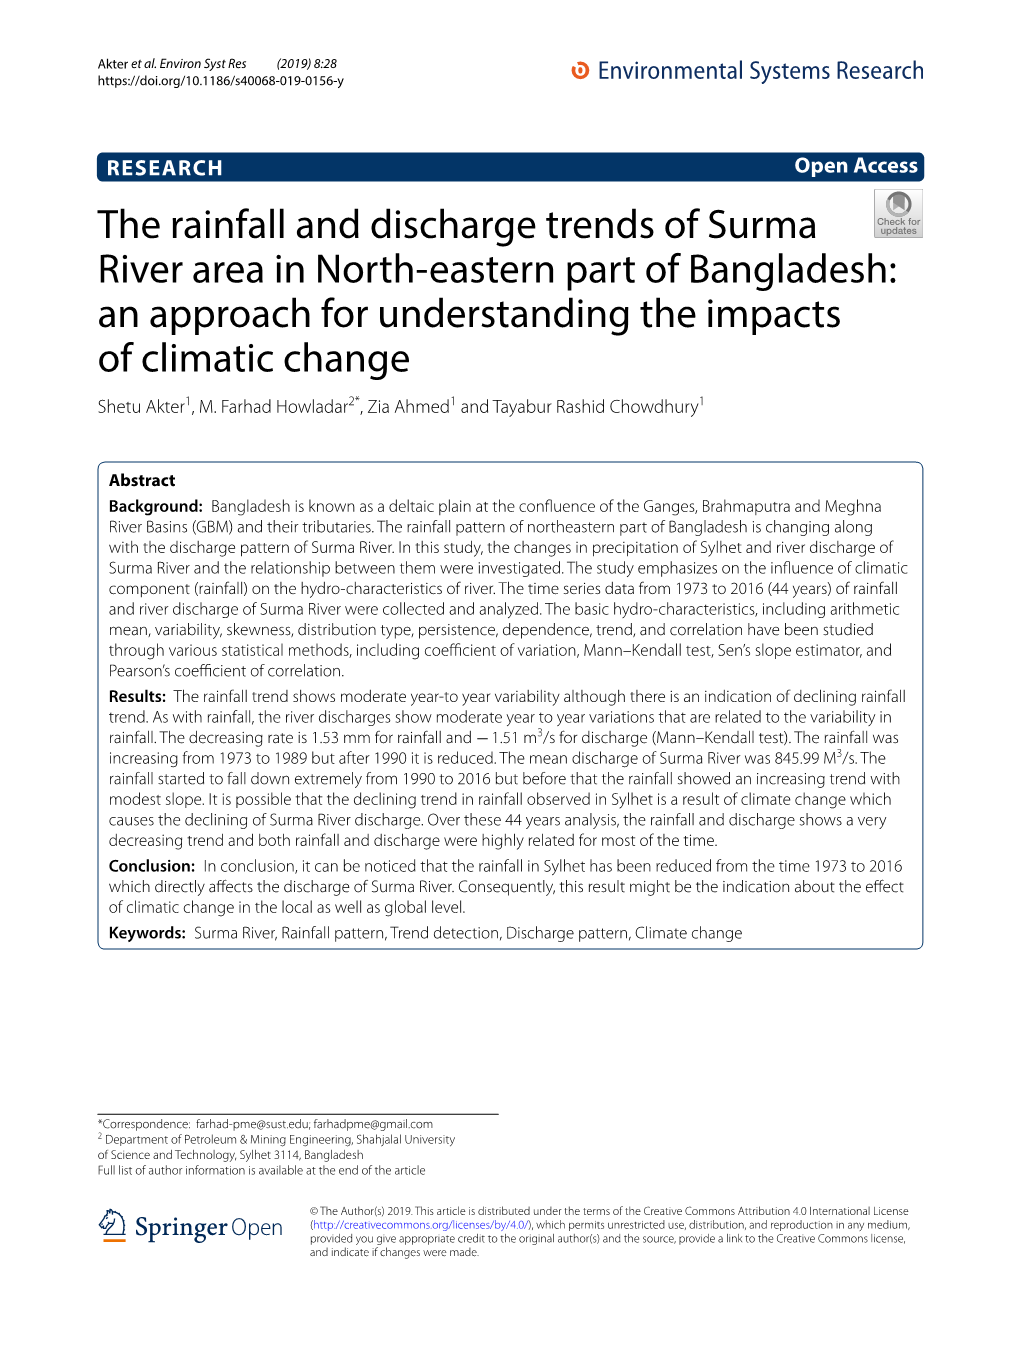 The Rainfall and Discharge Trends of Surma River Area in North-Eastern Part of Bangladesh: an Approach for Understanding The